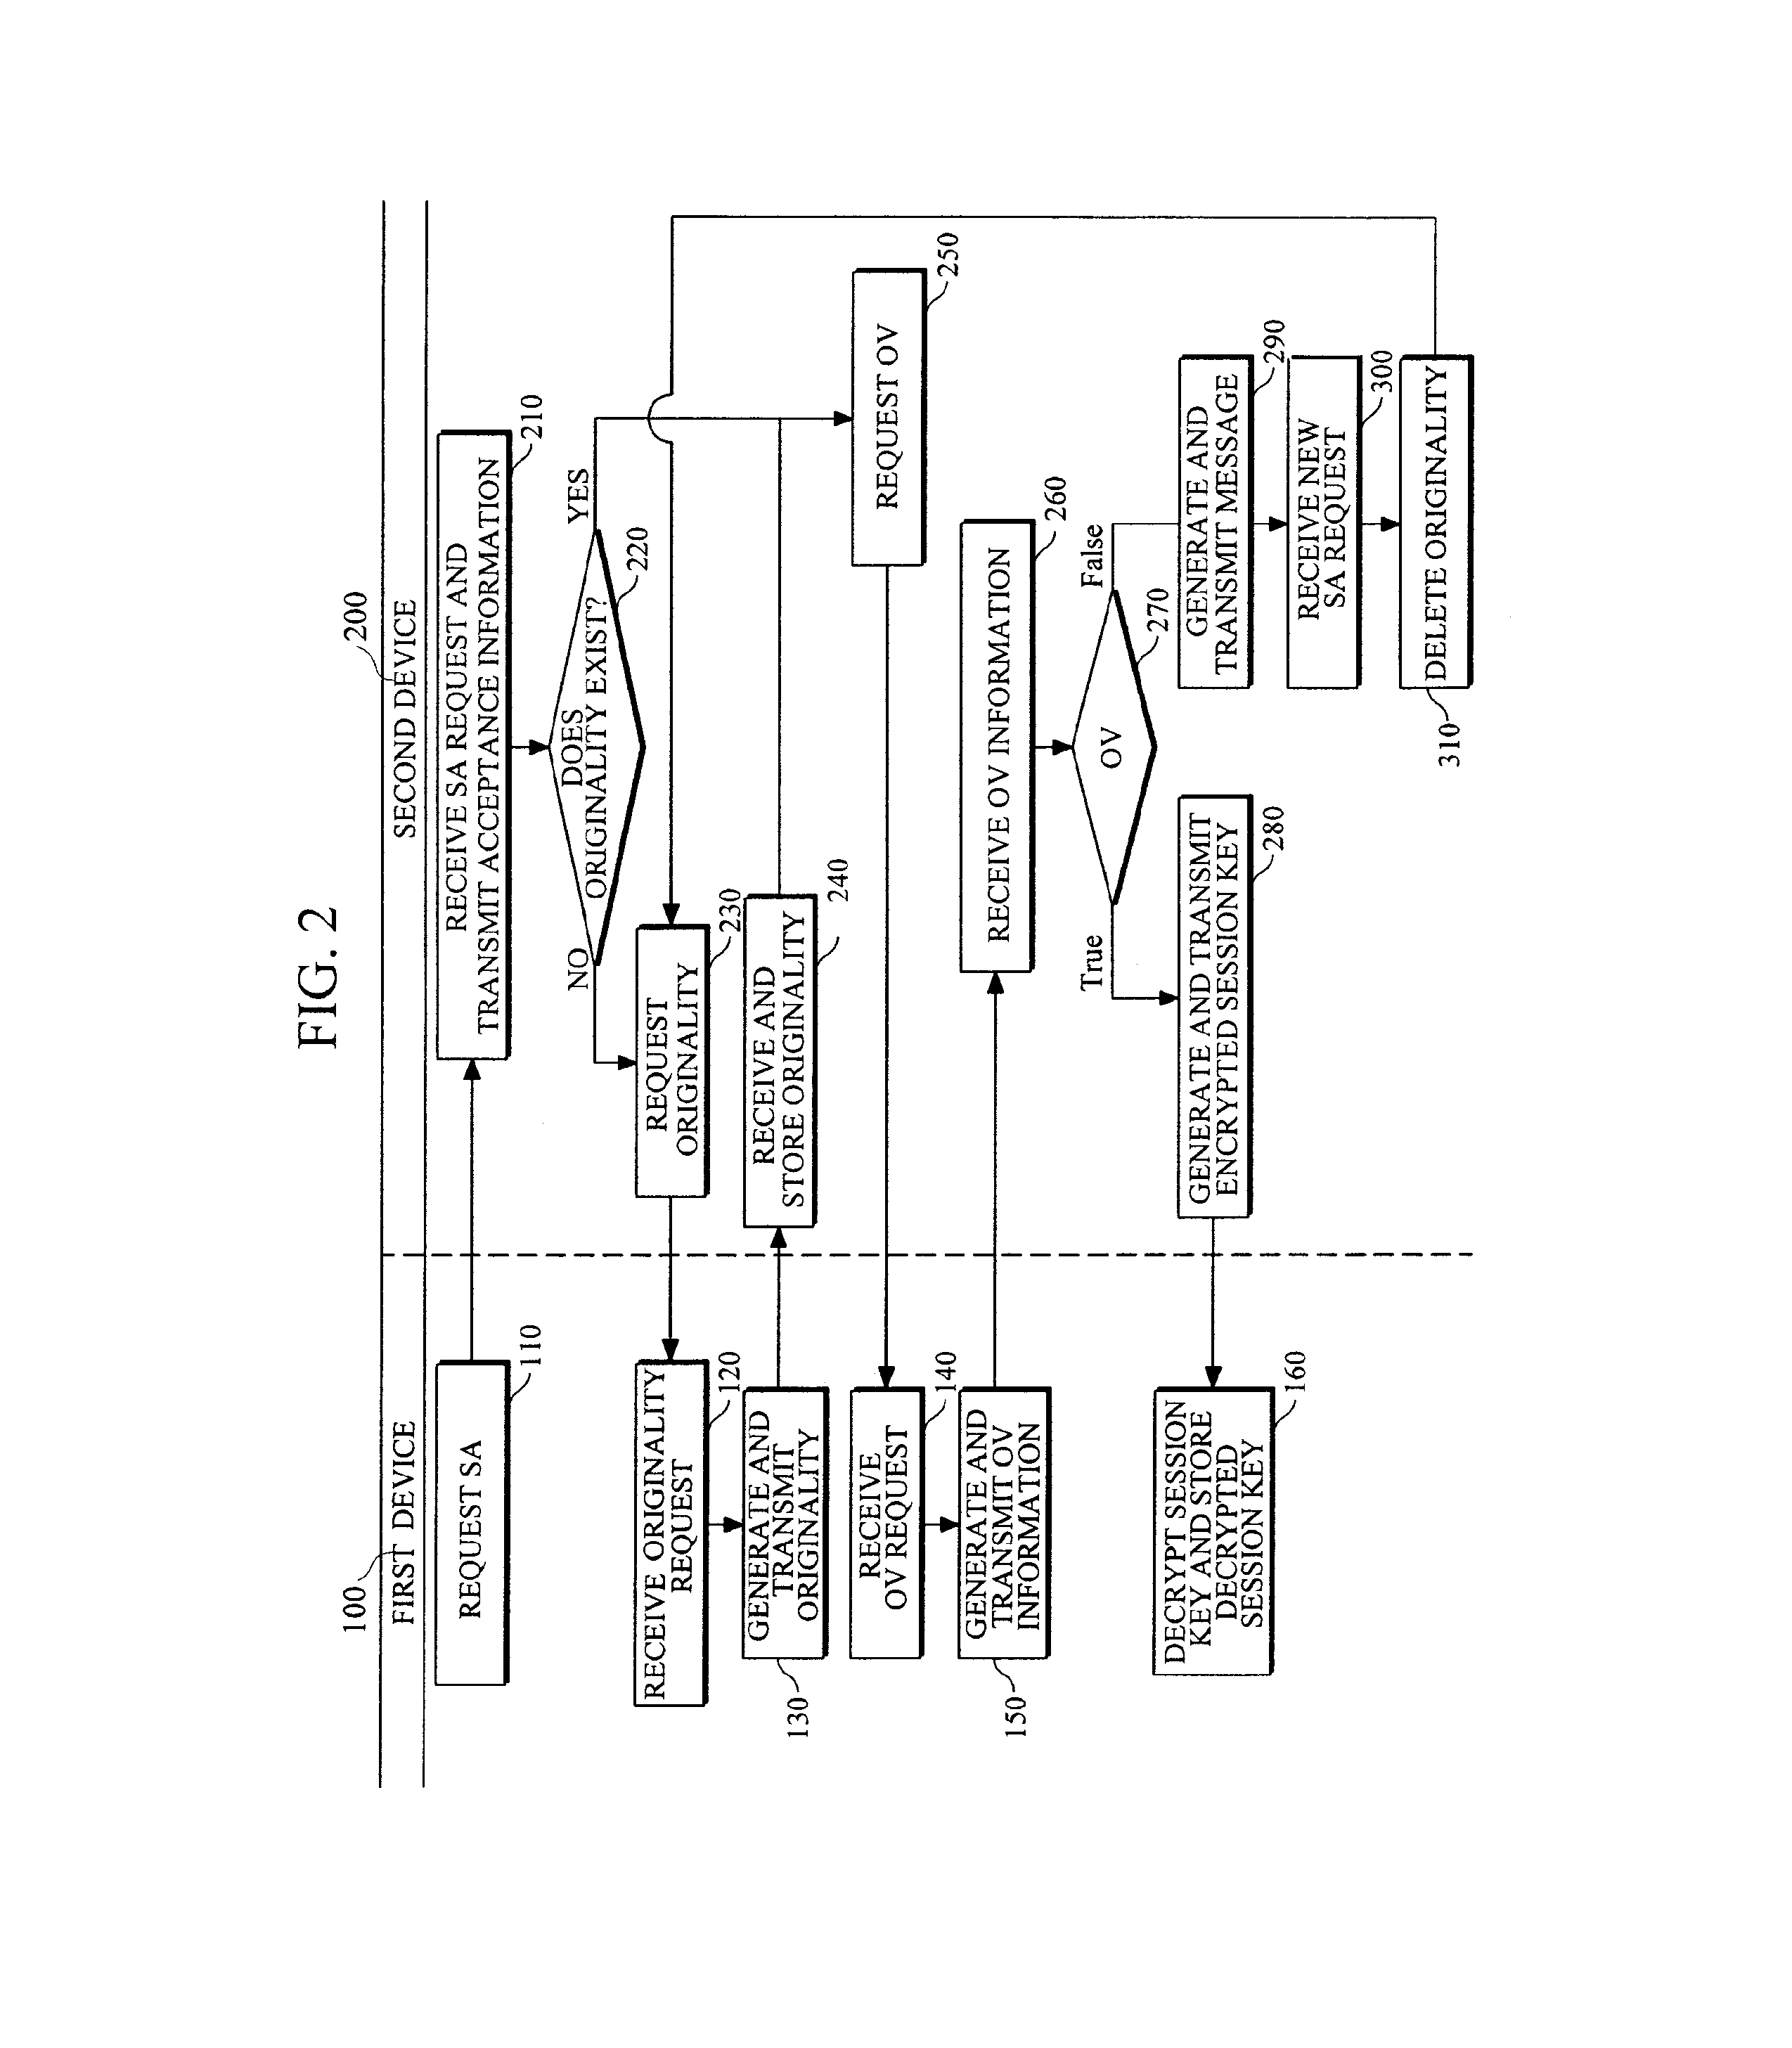 Method and devices for security association (SA) between devices